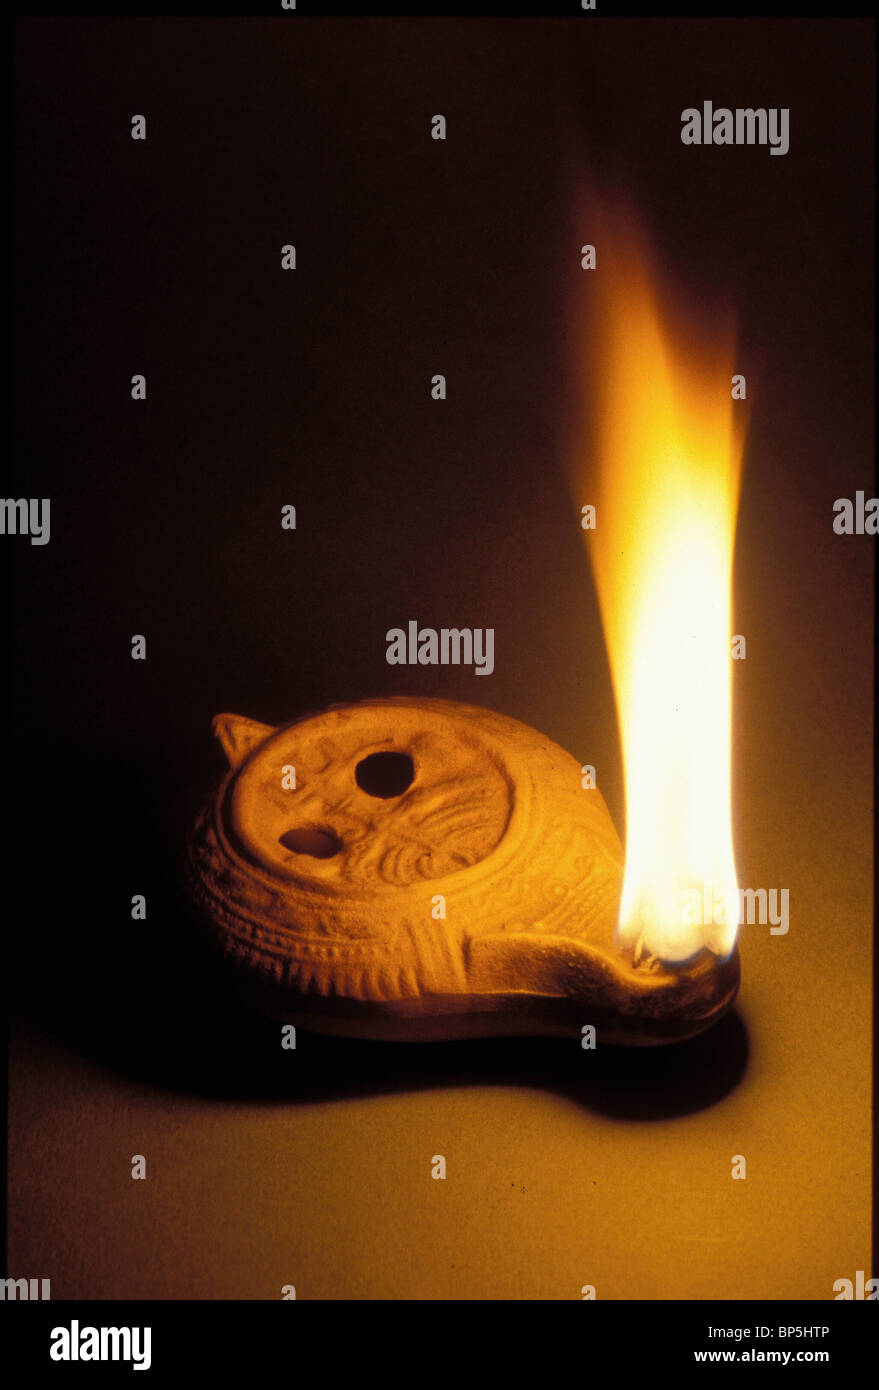 3329. LATE ROMAN PERIOD OIL LAMP WITH THE JEWISH SYMBOL OF THE SEVEN BRANCHED CANDELABRA; 'MENORAH' Stock Photo